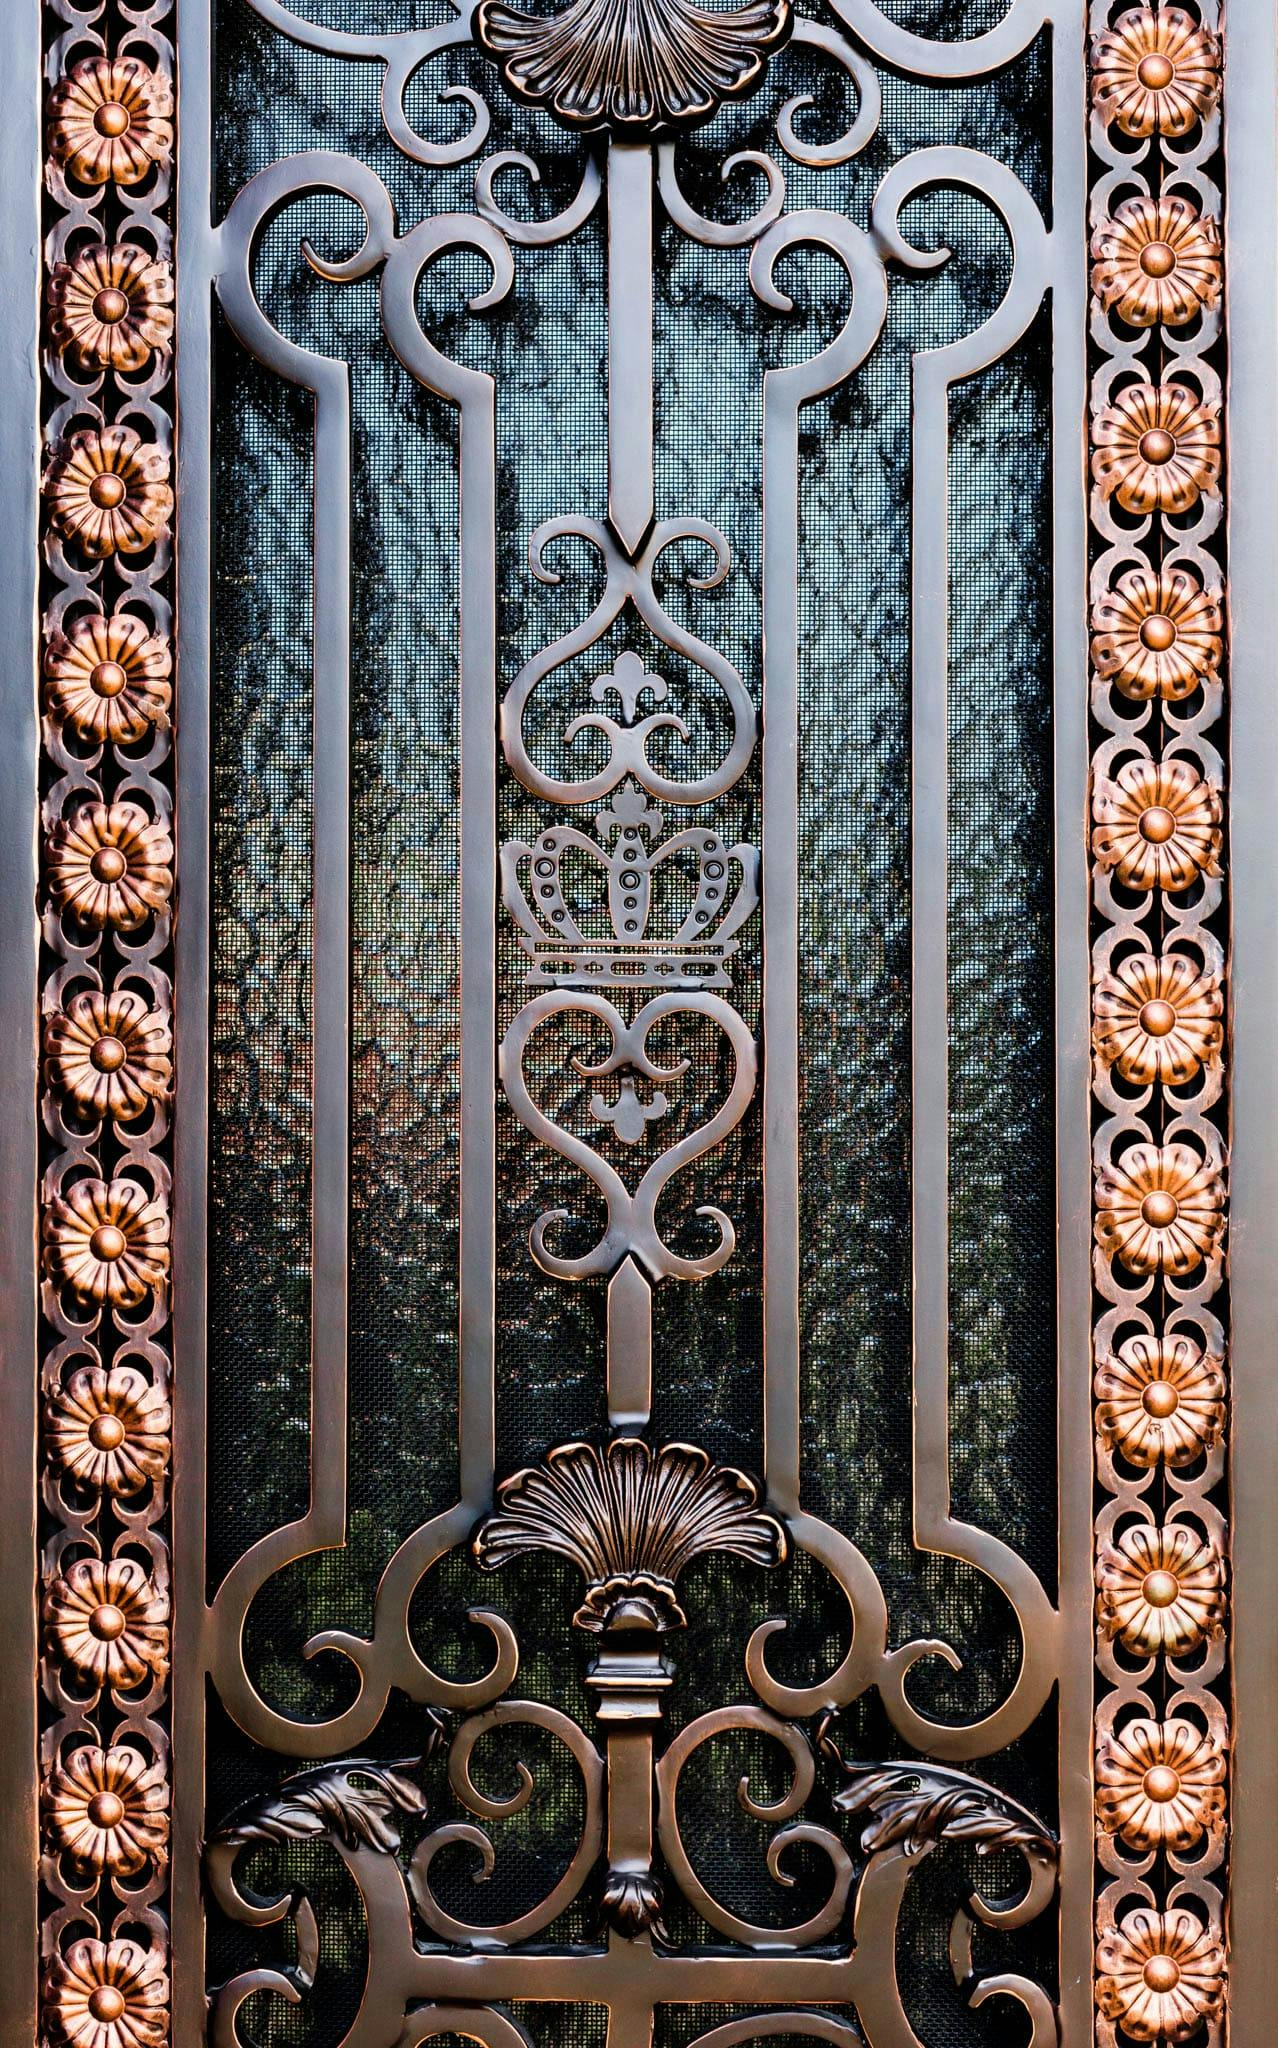 Elegant iron door with arched top and intricate scrollwork